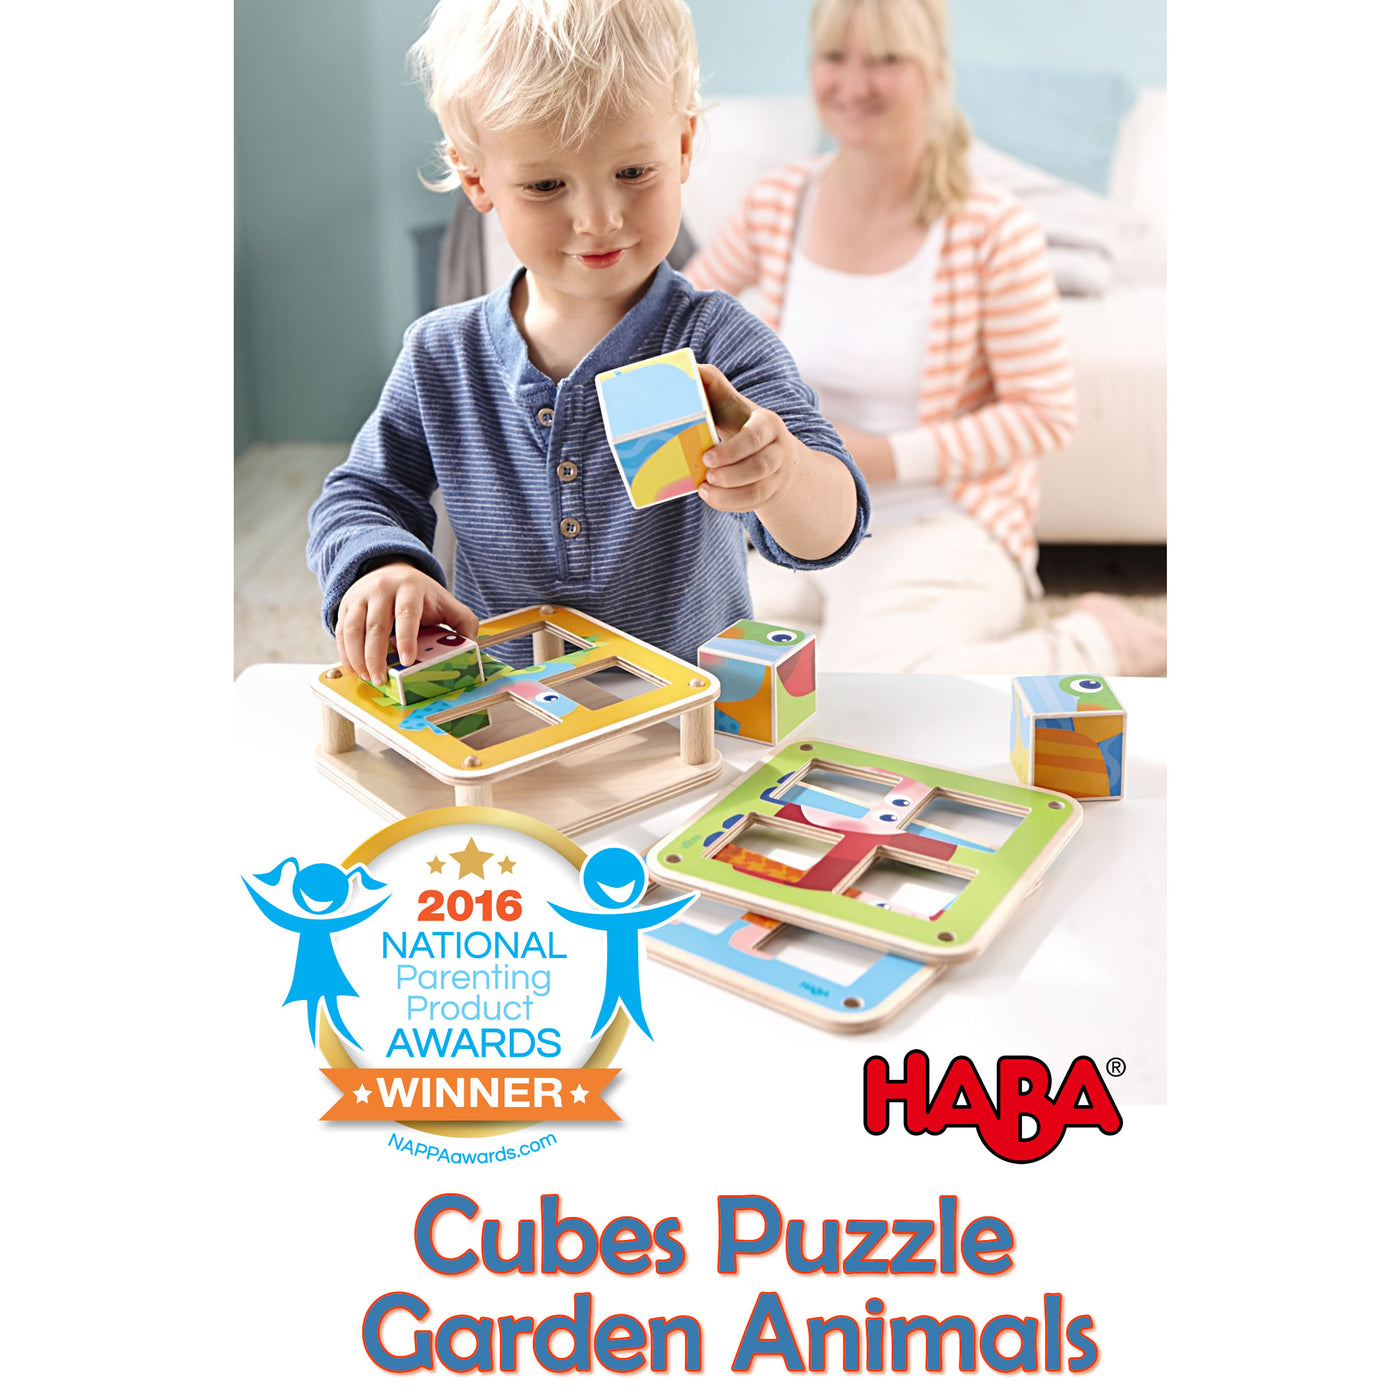 HABA Cubes Puzzle Wins National Parenting Product Award